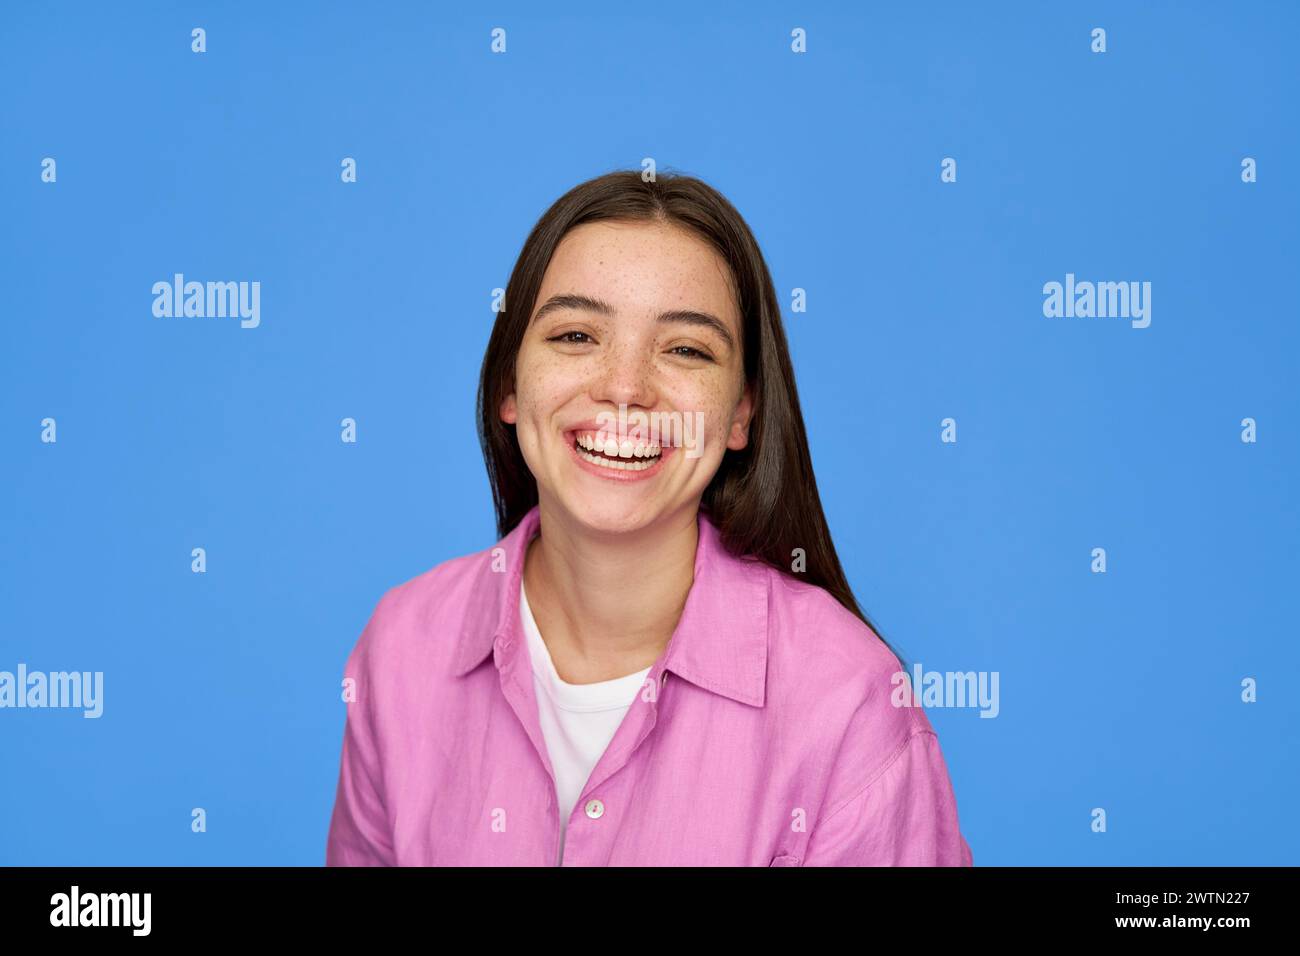 Smiling Latin teen girl student looking at camera isolated on blue background. Stock Photo